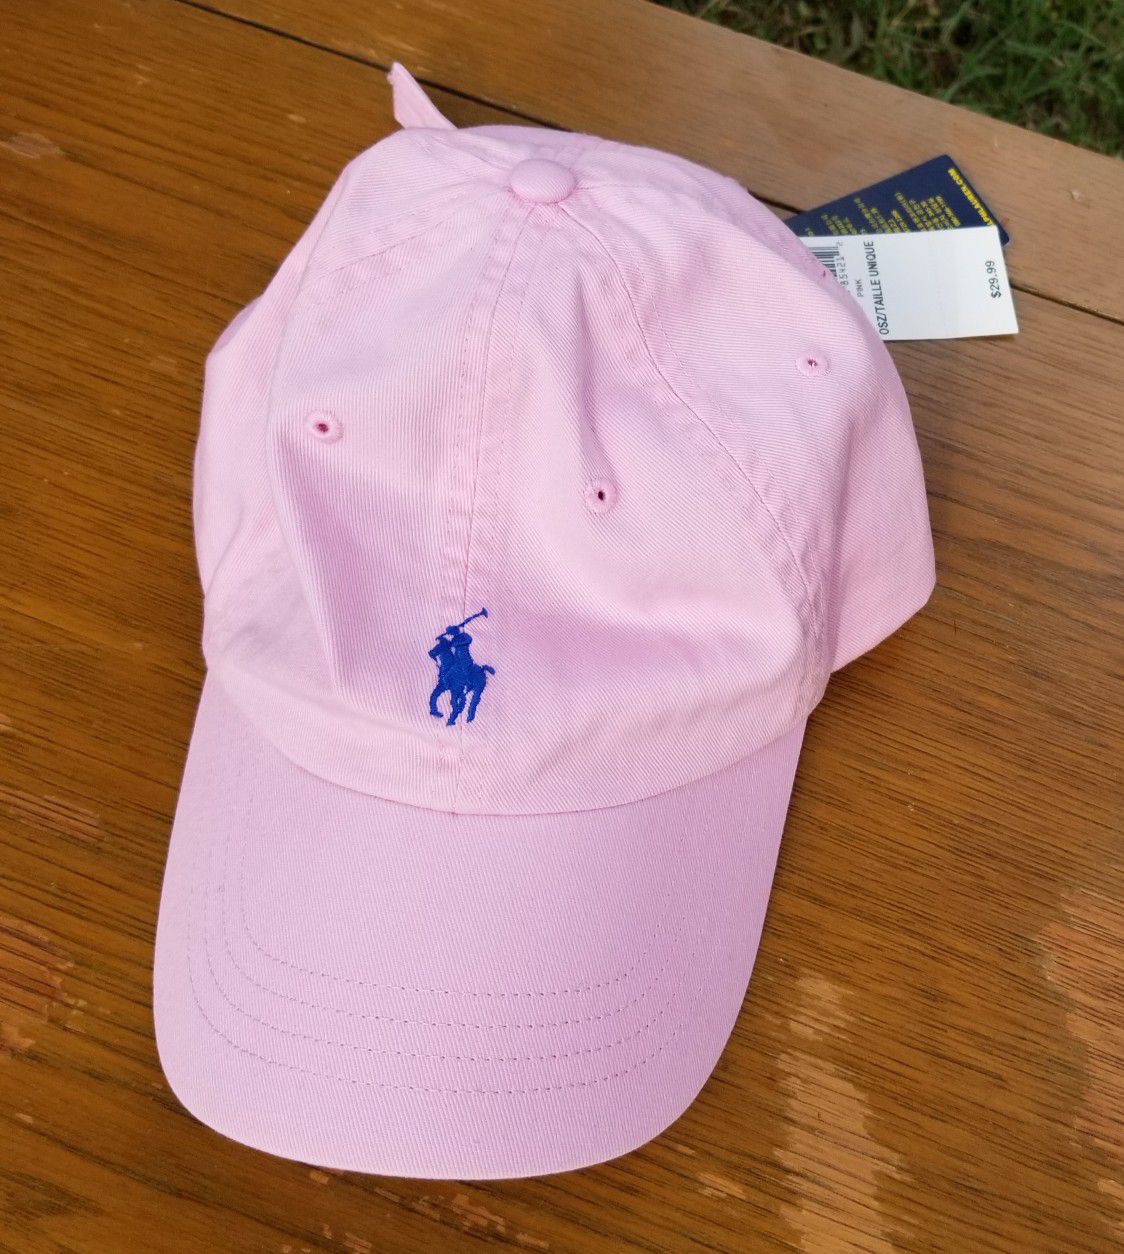 Polo Ralph Lauren light pink baseball hat/cap new with tags